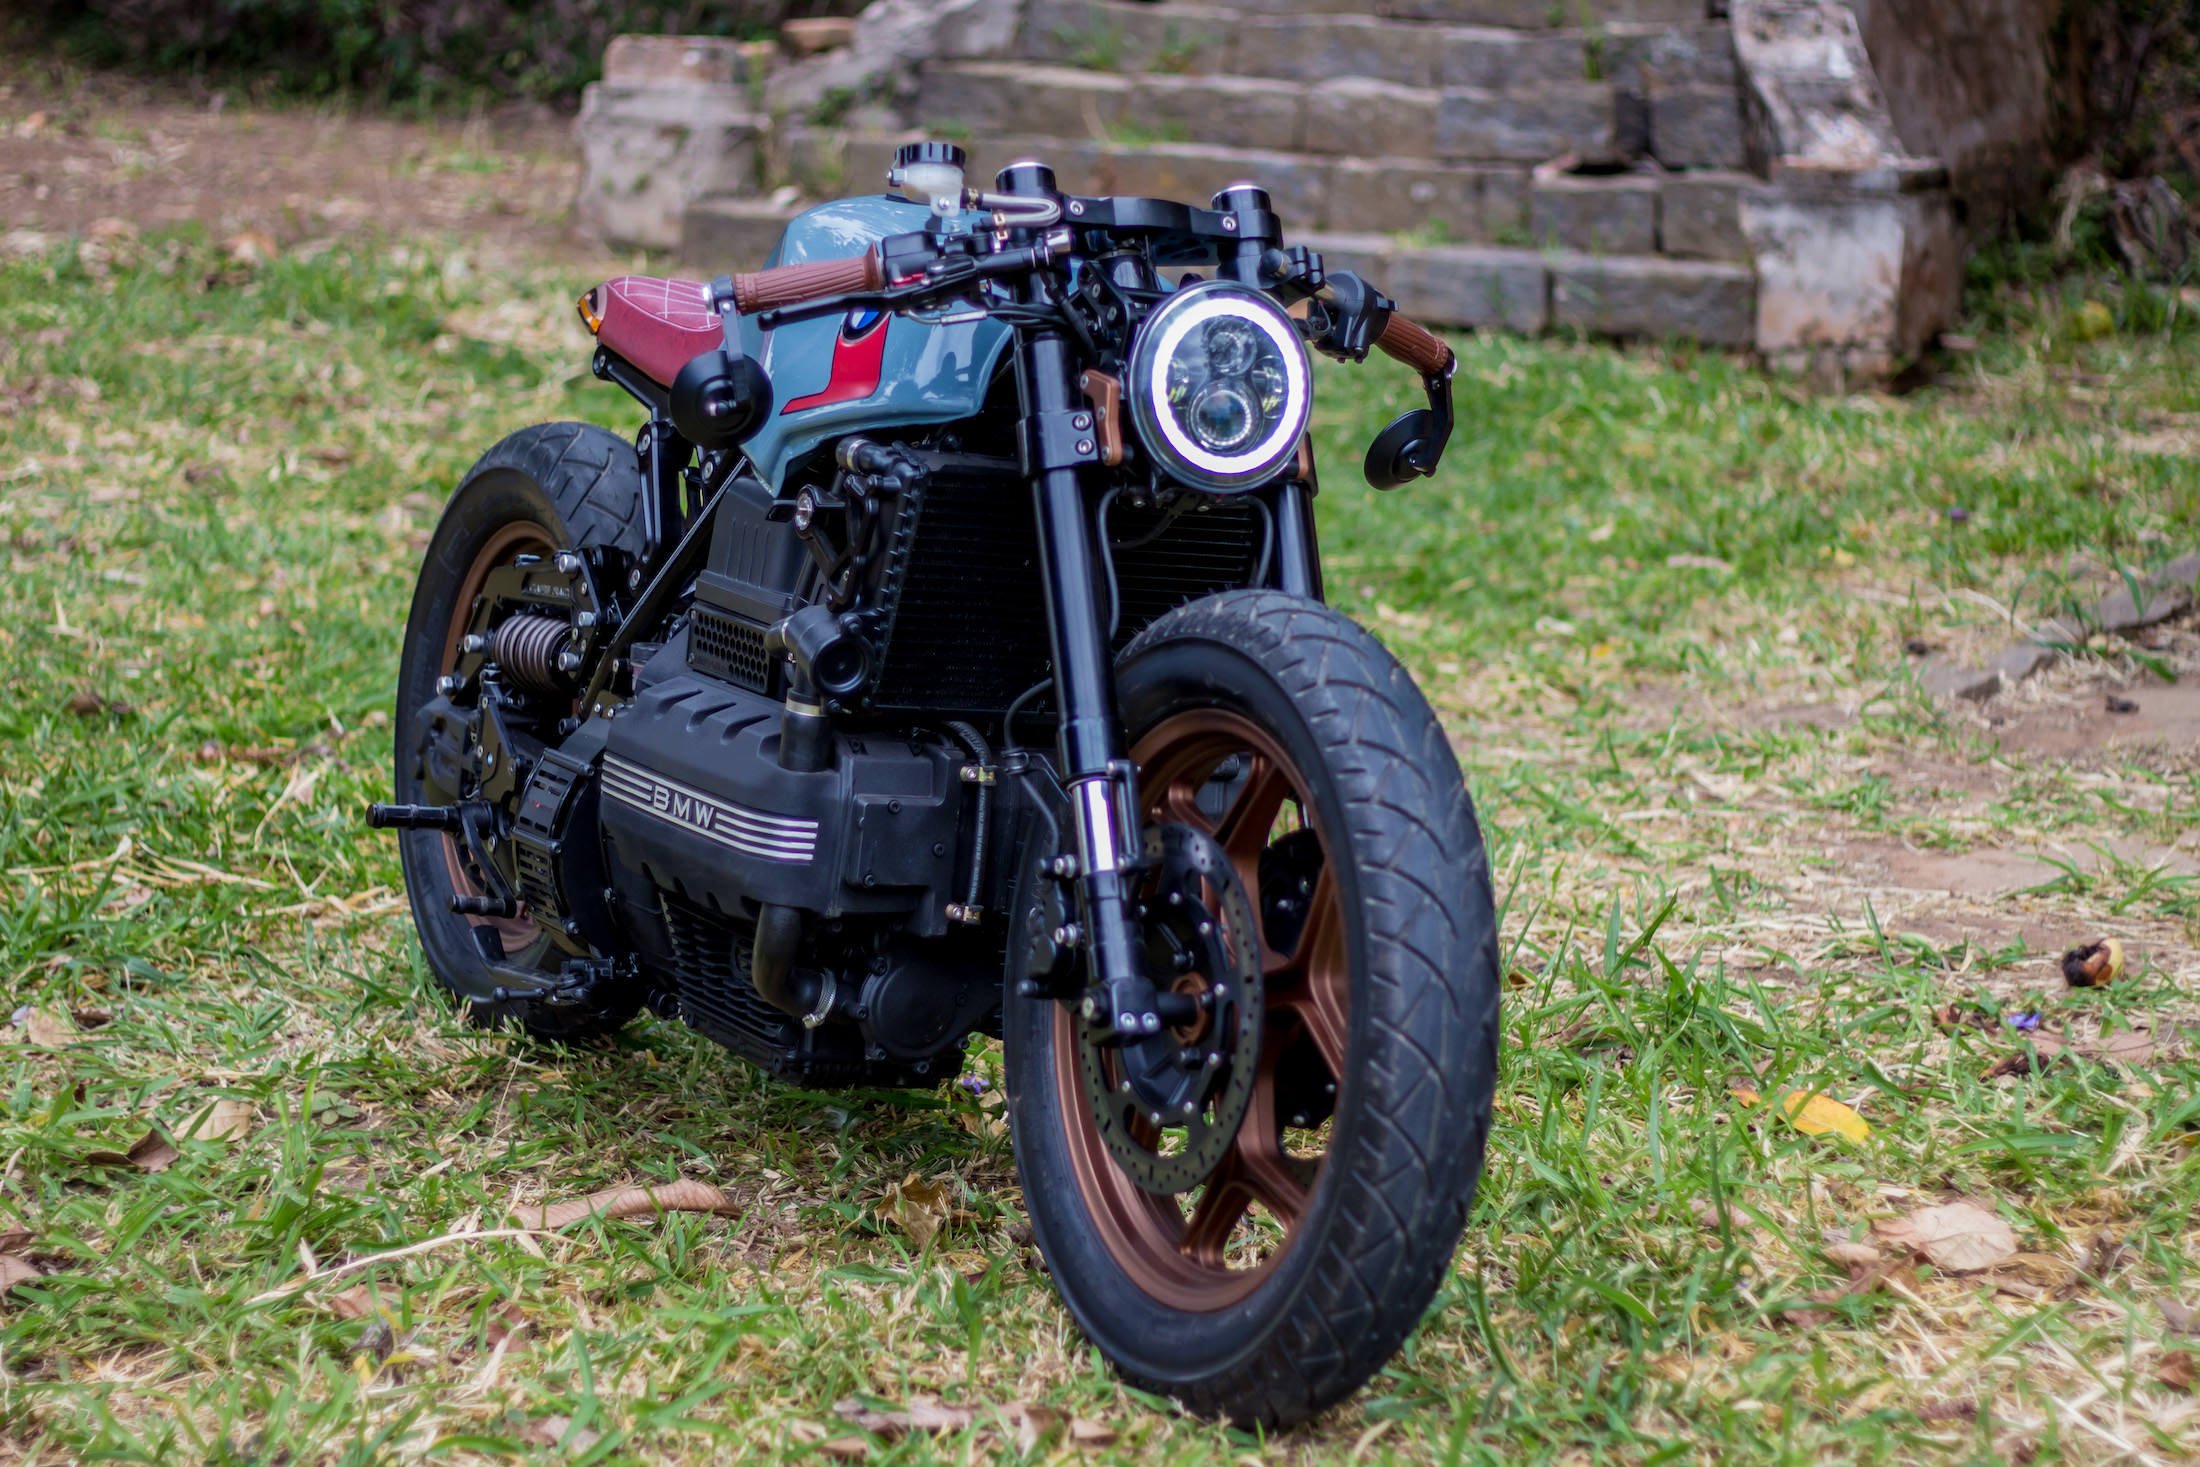 A Brazilian Bmw K100 Cafe Racer With A Cvt Transmission For Disabled Riders